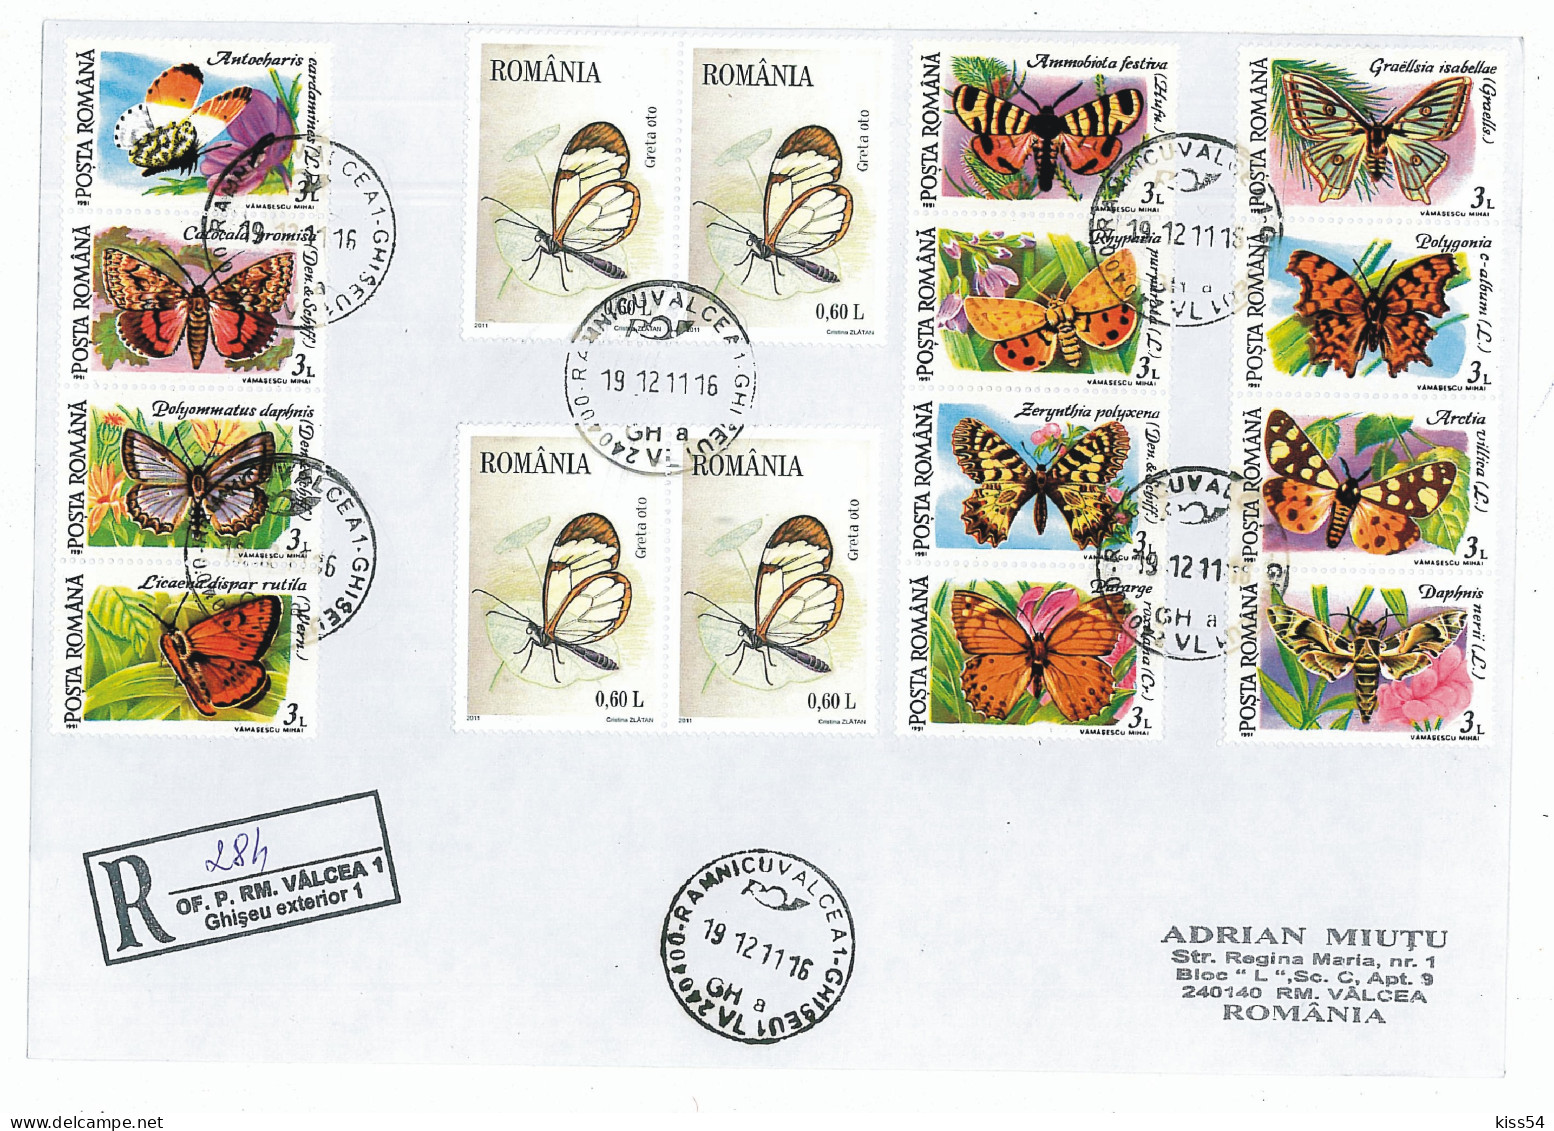 NCP 23 - 284b-a BUTTERFLY, Romania - Registered, Cover - 2011 - Covers & Documents